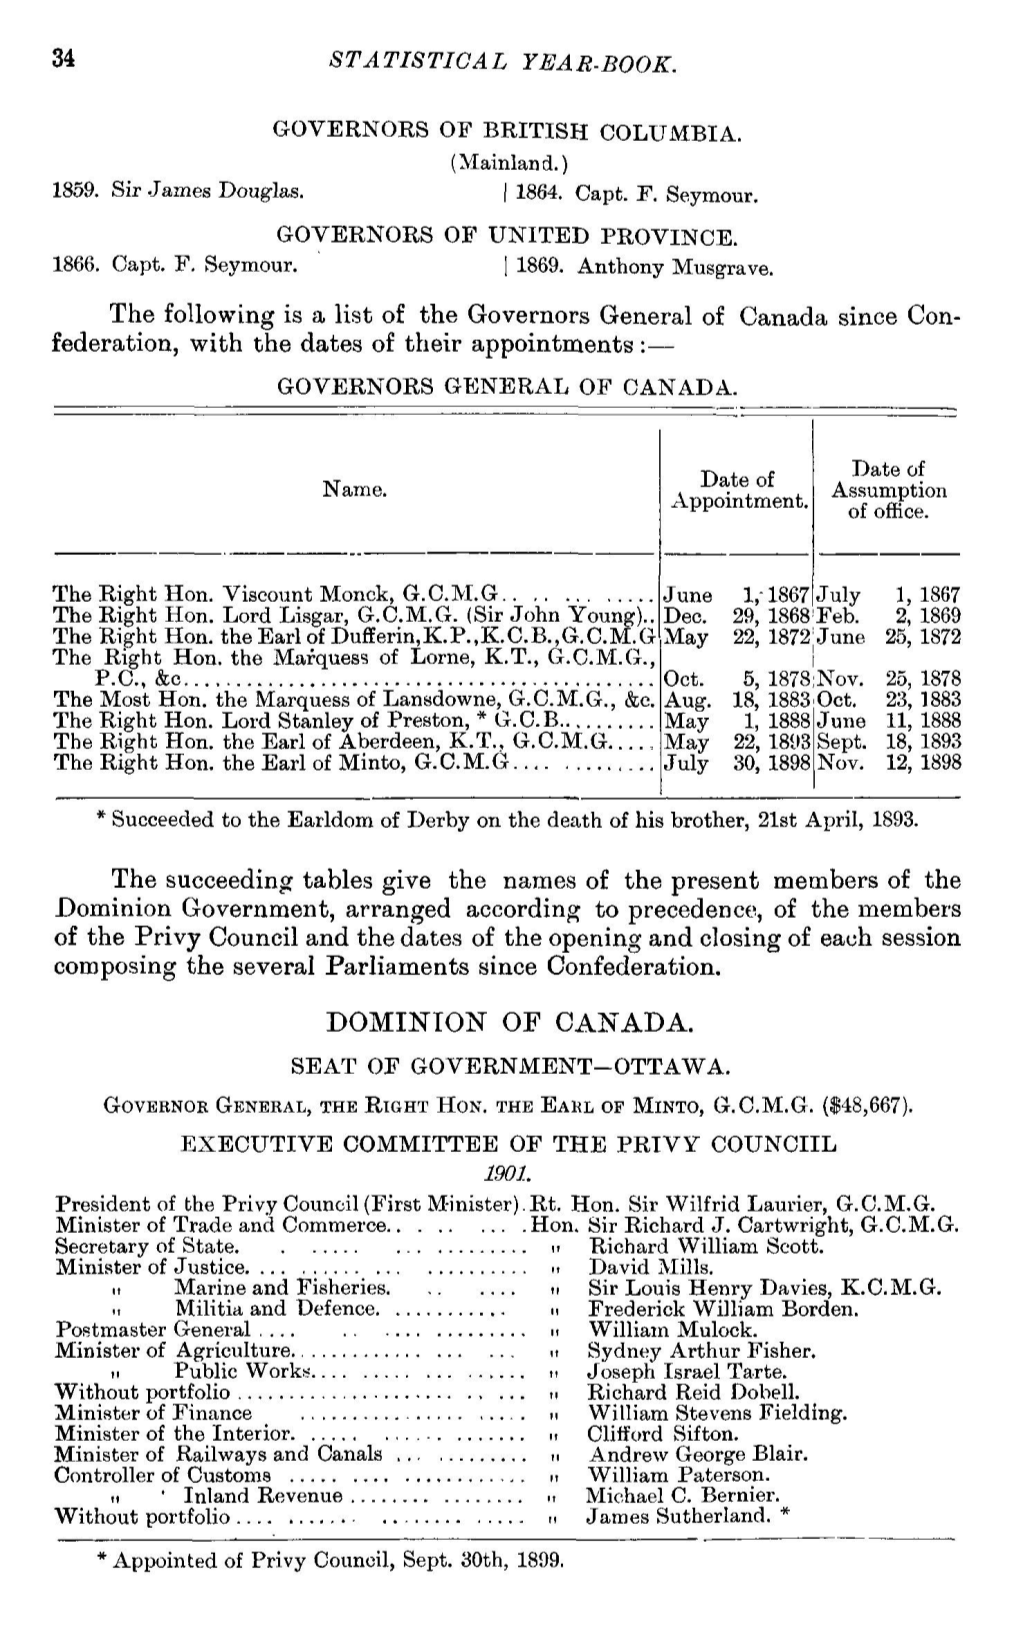 GOVERNORS GENERAL of CANADA. I